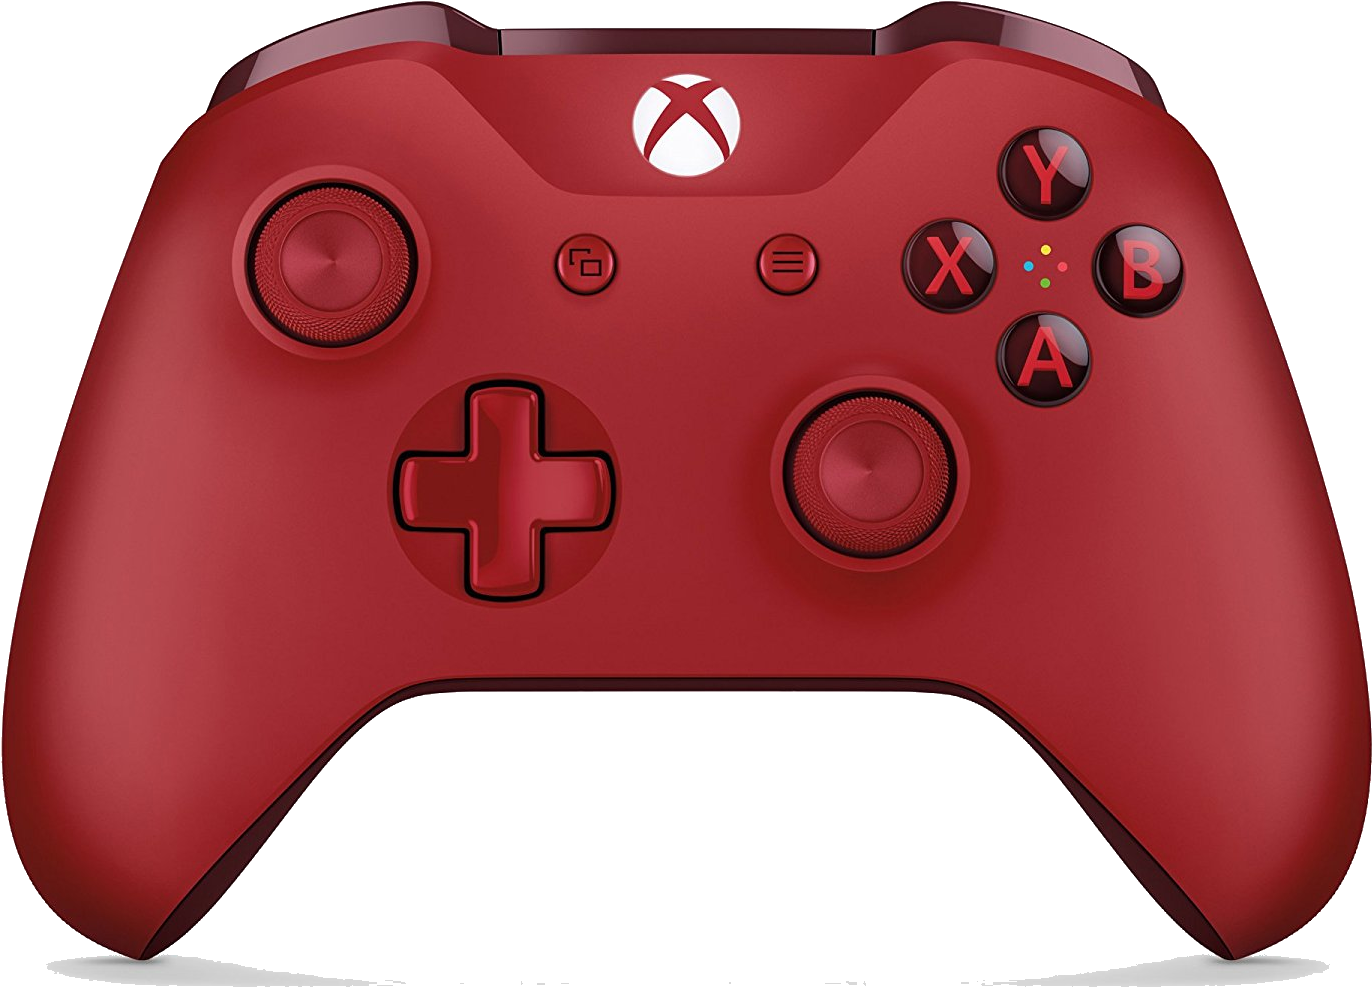 A Red Video Game Controller